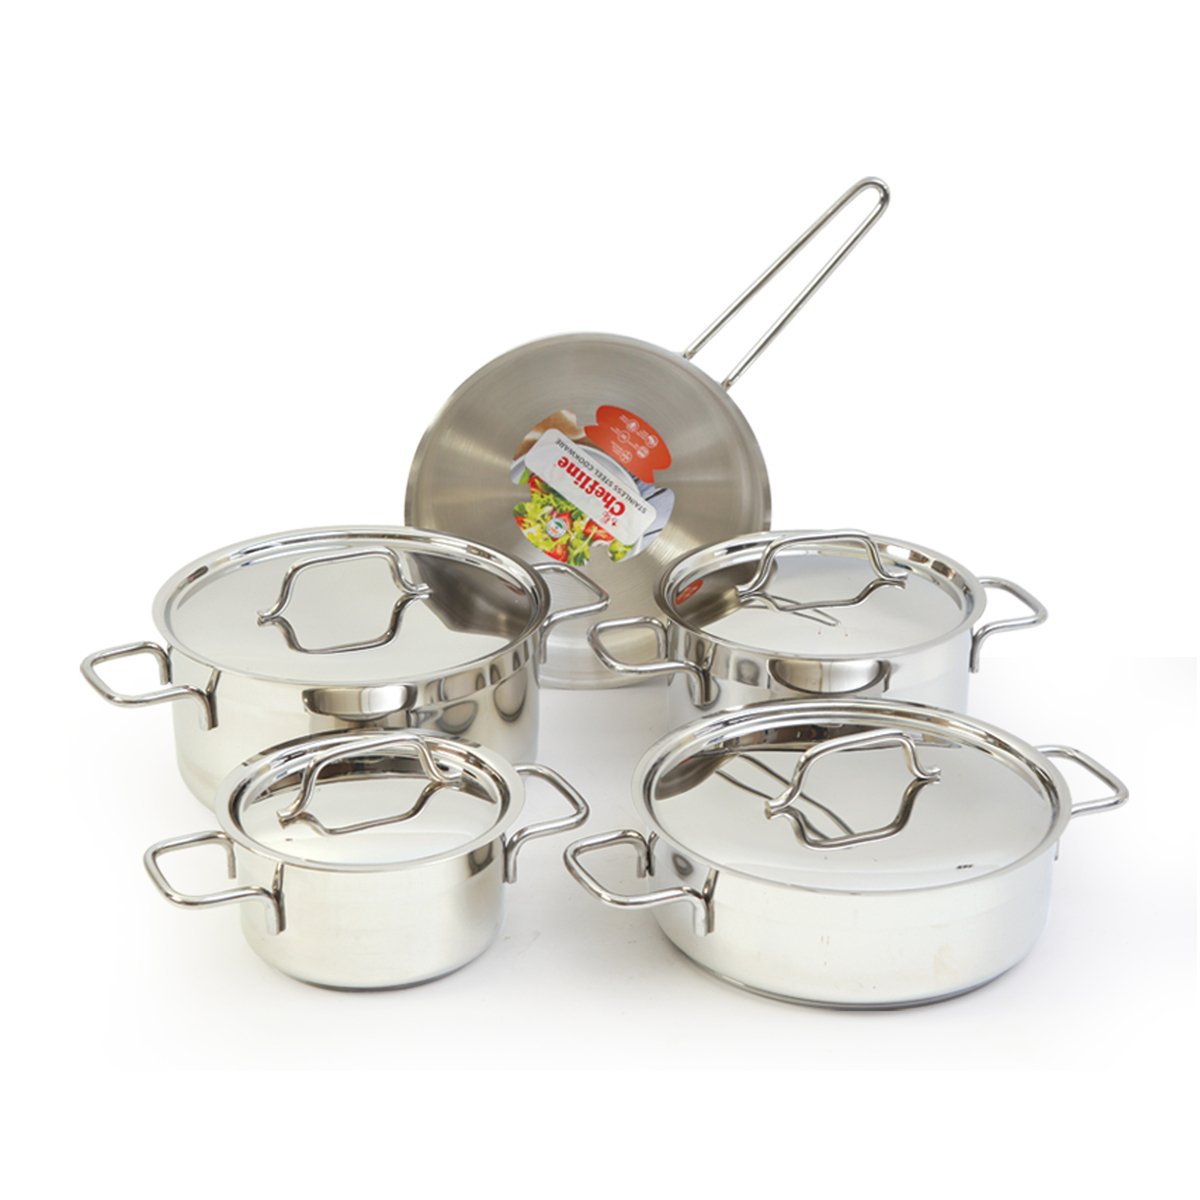 Chefline Stainless Steel Cookware Set BNG9 9Pcs